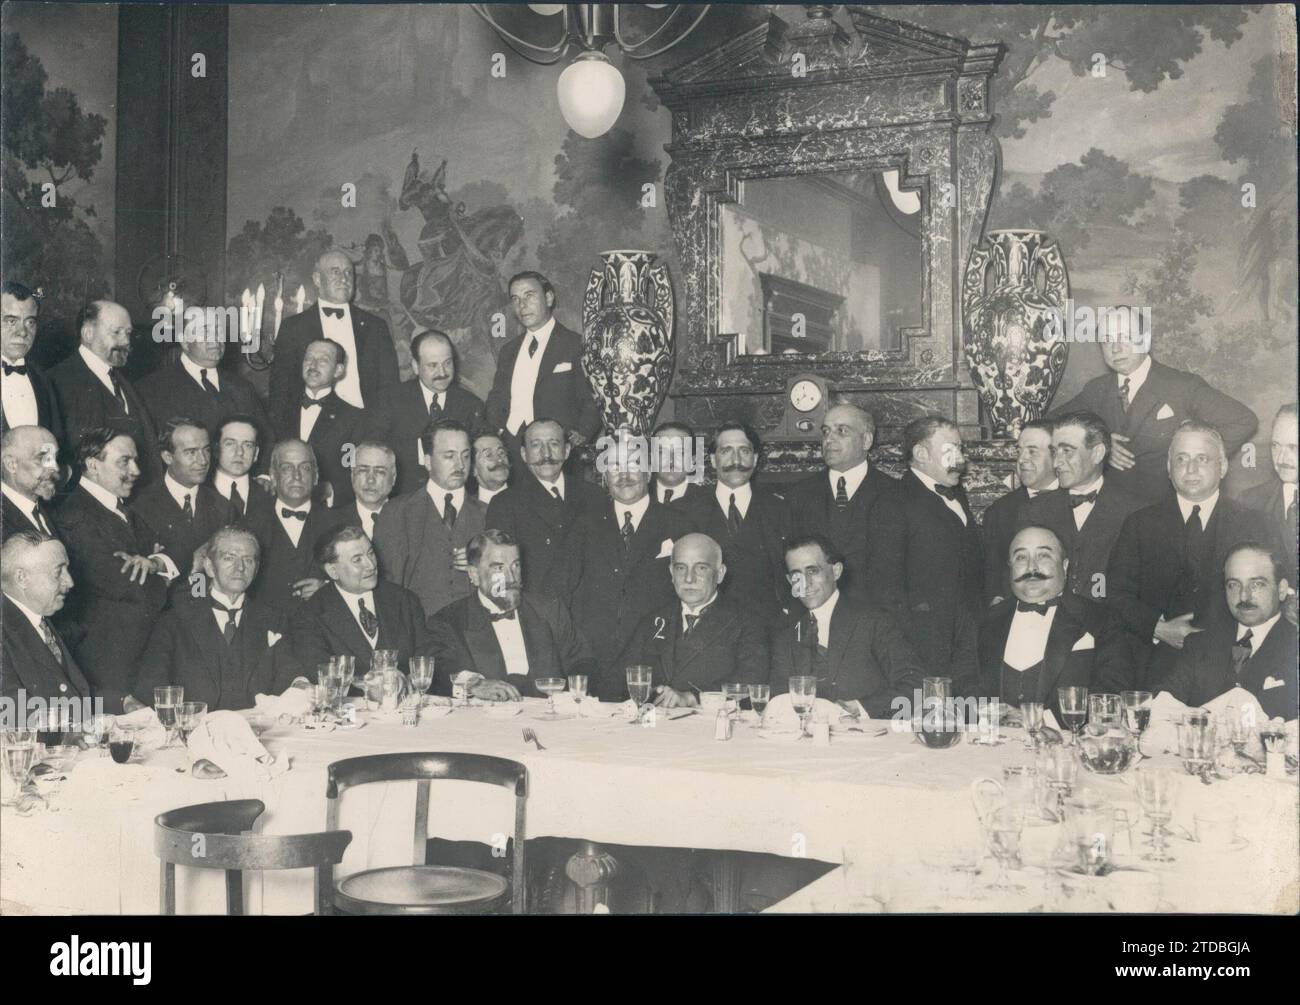 04/30/1923. Madrid. In the circle of Fine Arts. Banquet held in honor of the Argentine painter Benito Quinquela (1), with the assistance of the ambassador of the Argentine Republic (2), to celebrate the success achieved in the exhibition of his paintings. Credit: Album / Archivo ABC / José Zegri Stock Photo